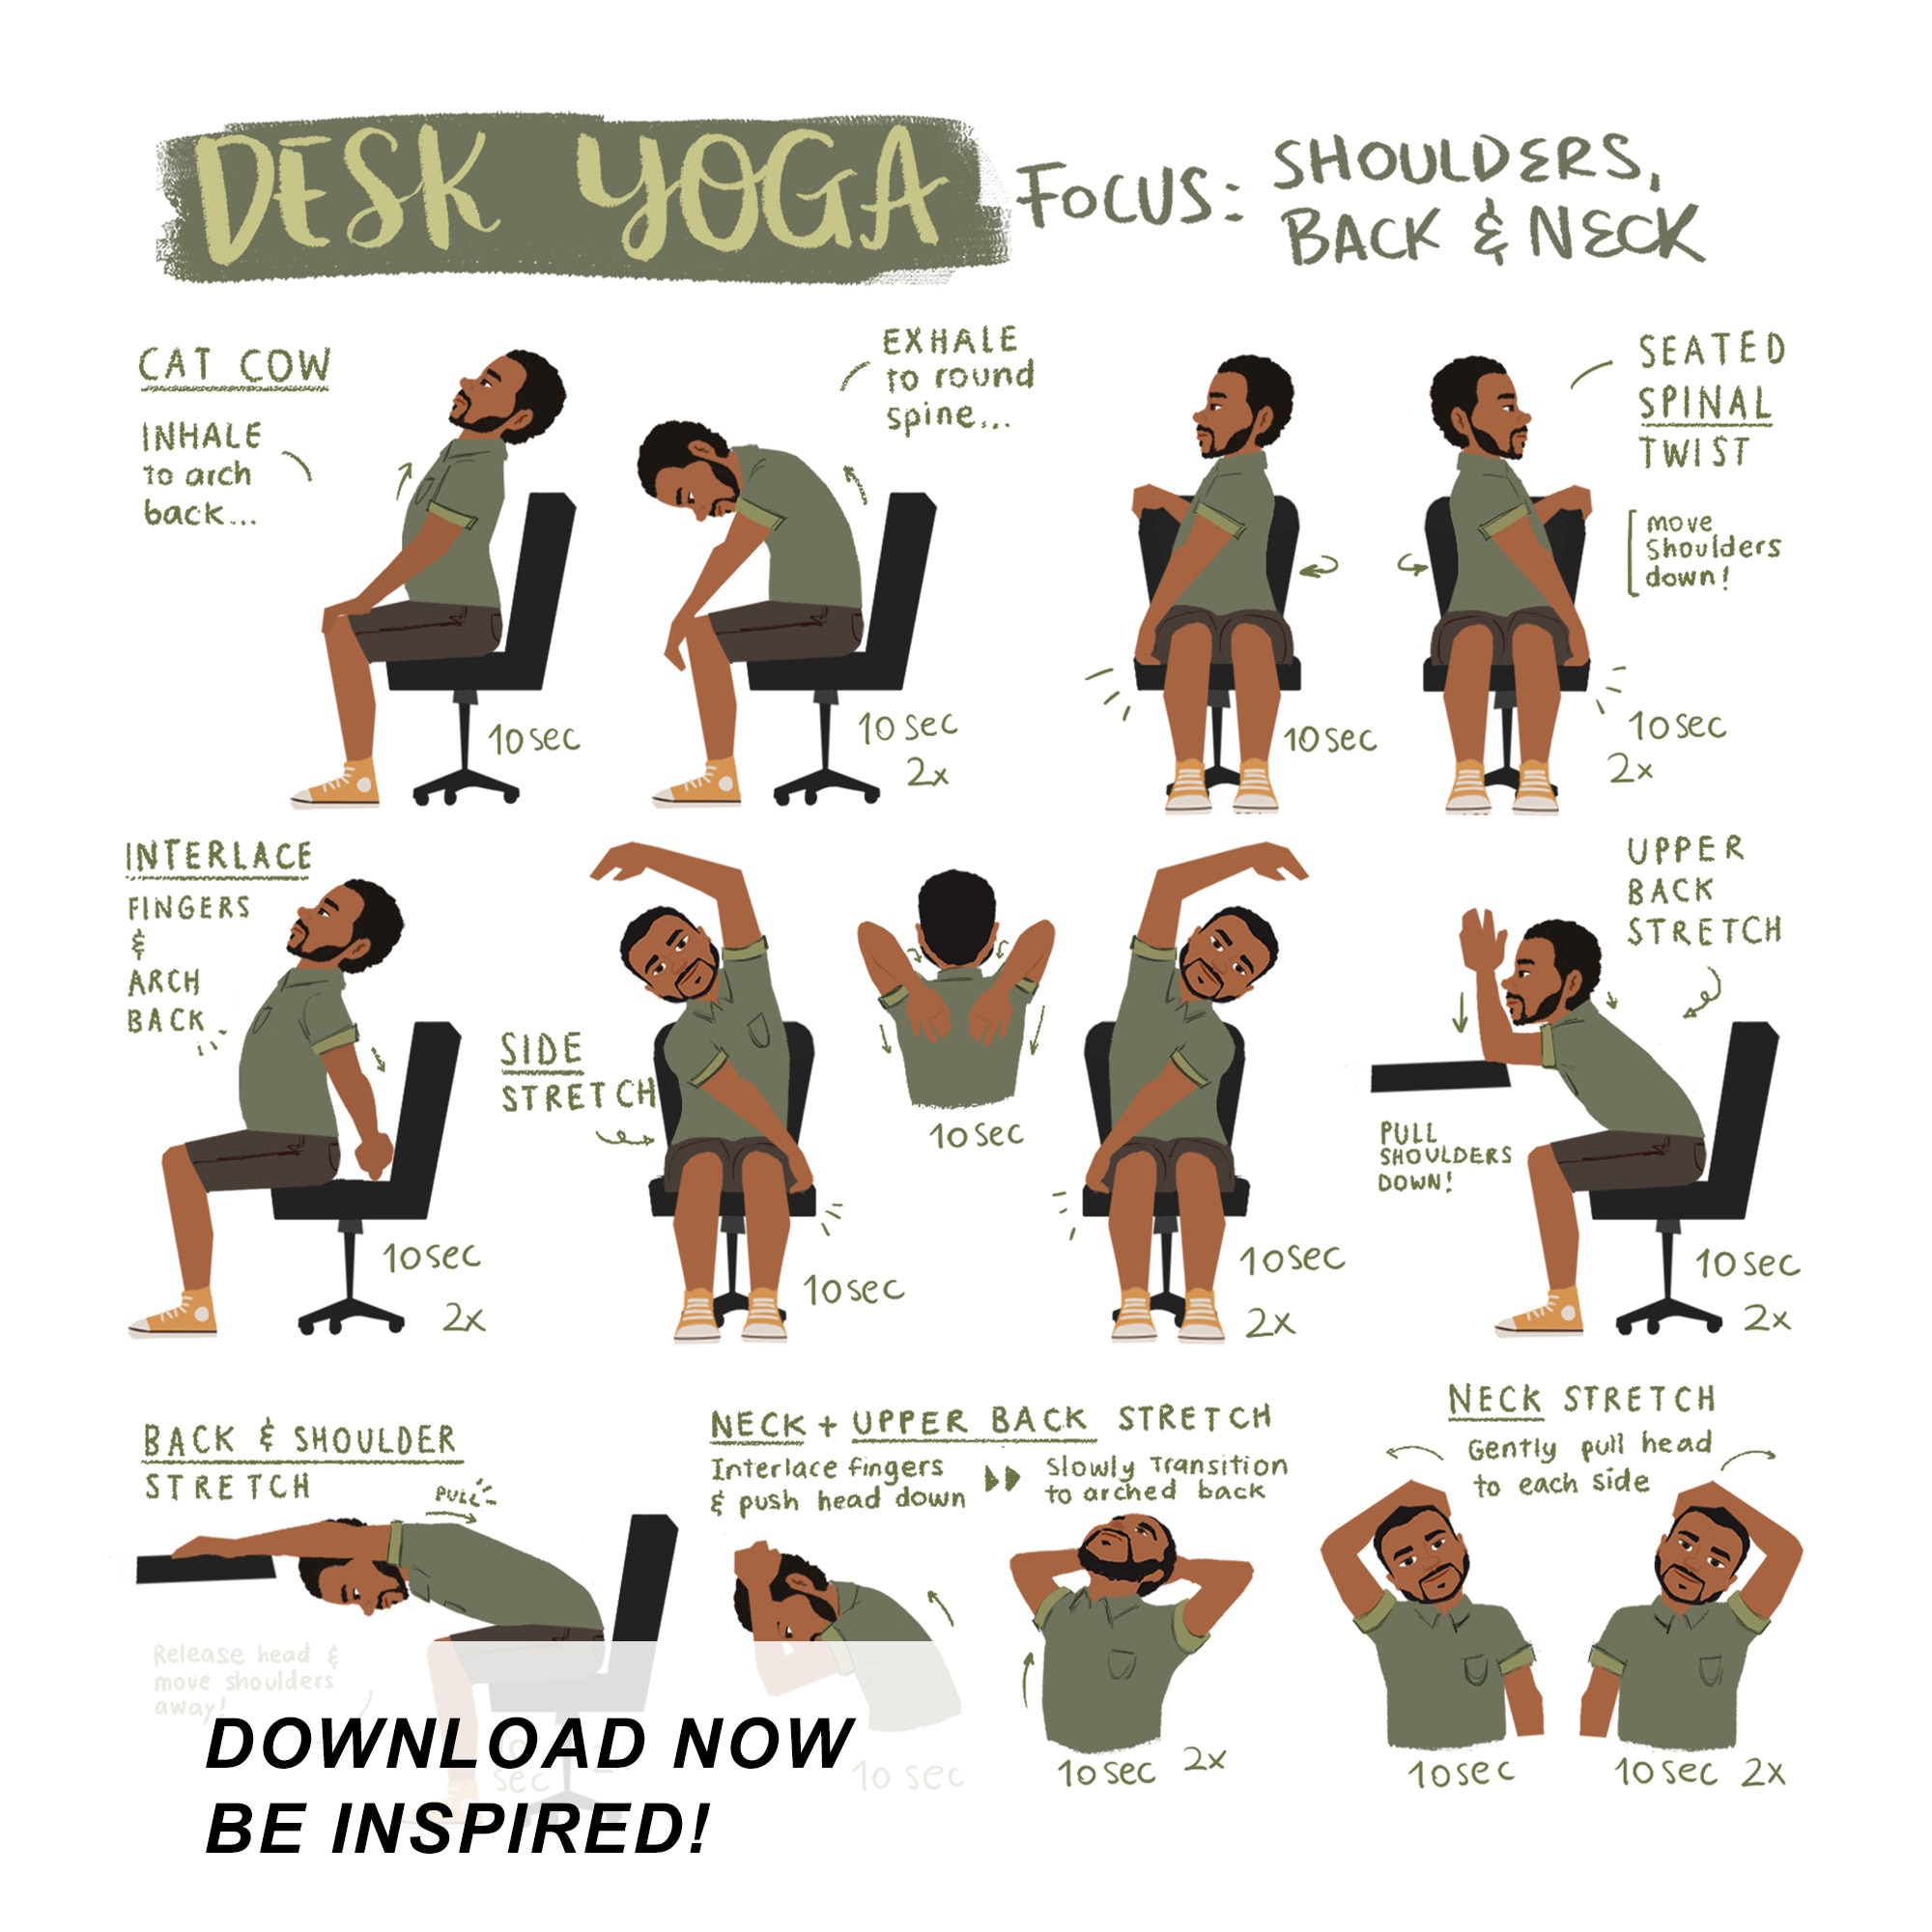 Desk Yoga Focus on Shoulders, Back, and Neck Physical Print Chair Yoga  Office Yoga 10x10in, 12x12in, 14x14in, 16x16in, 18x18in 